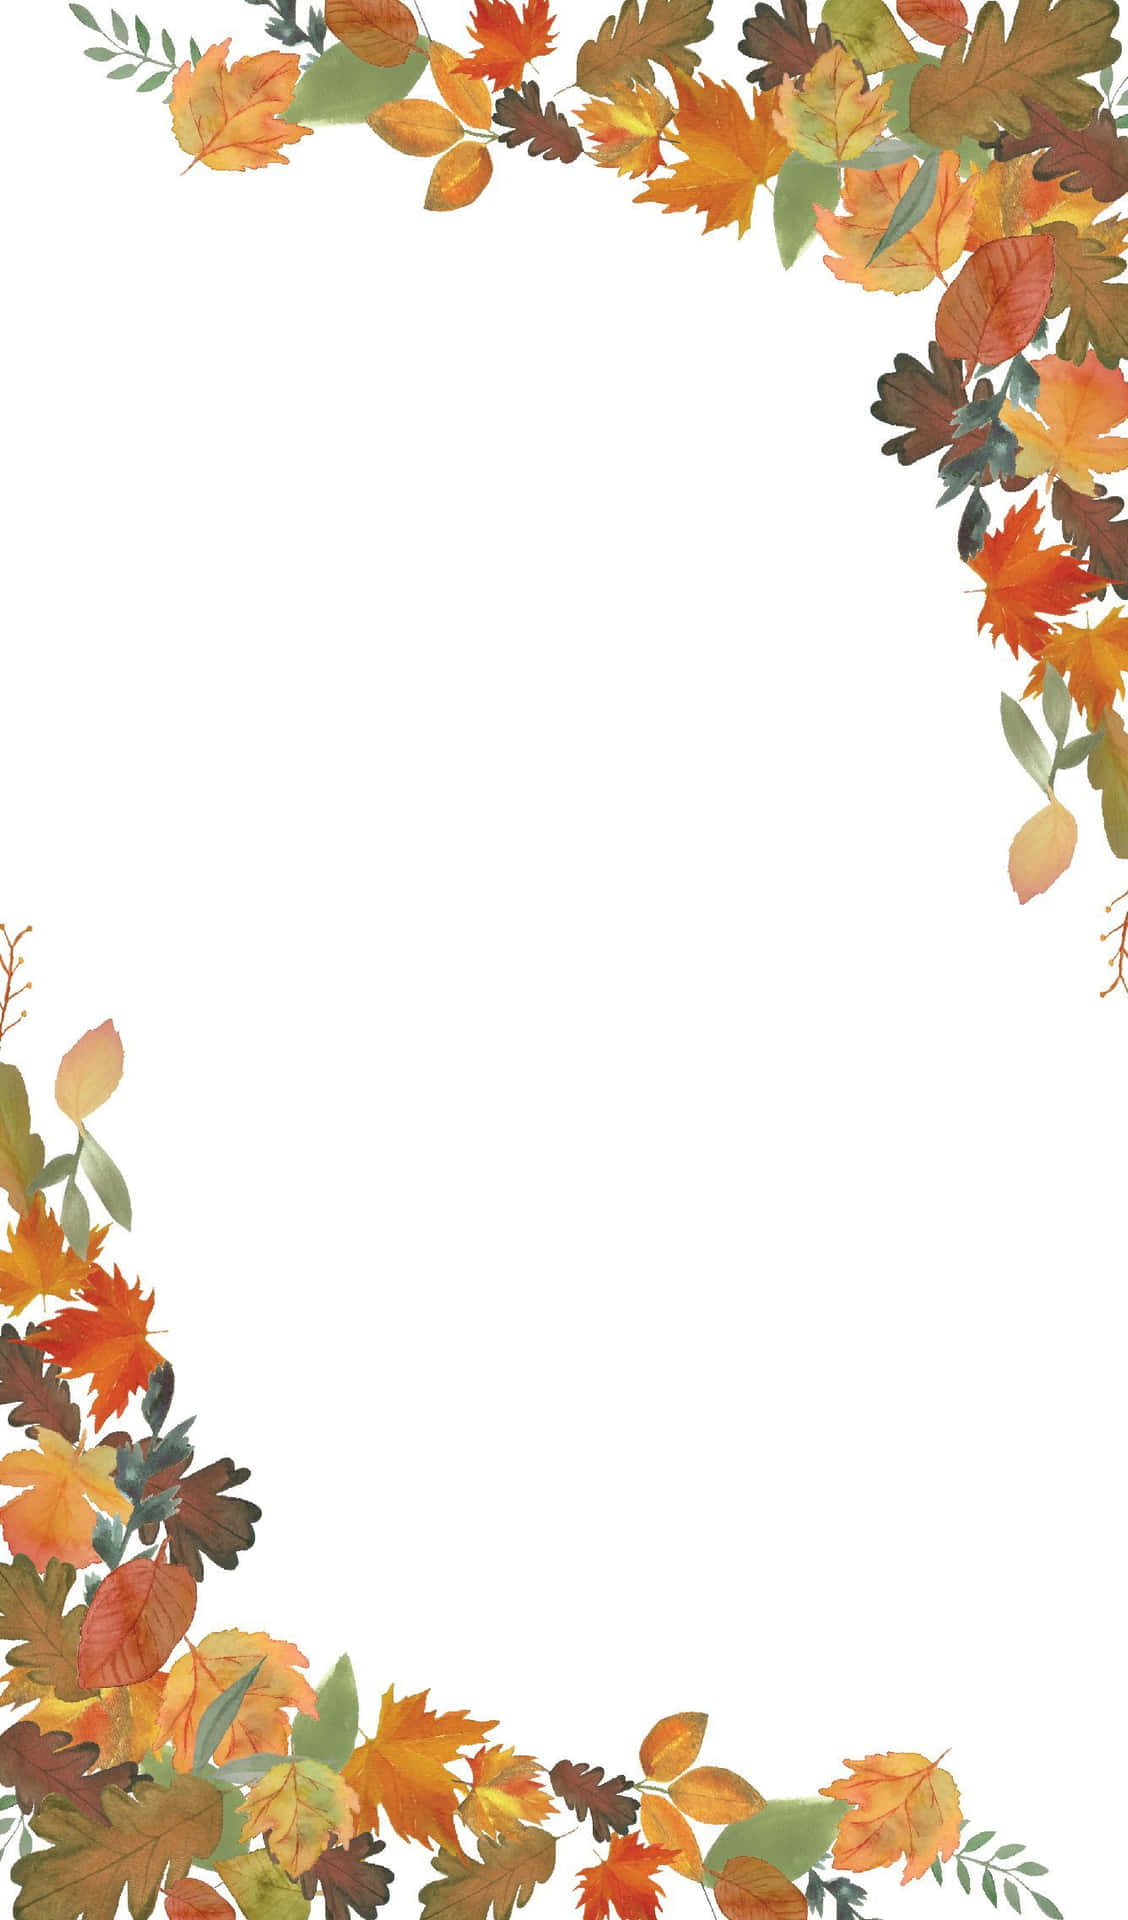 Get Cozy with a Cute Autumn Iphone Wallpaper